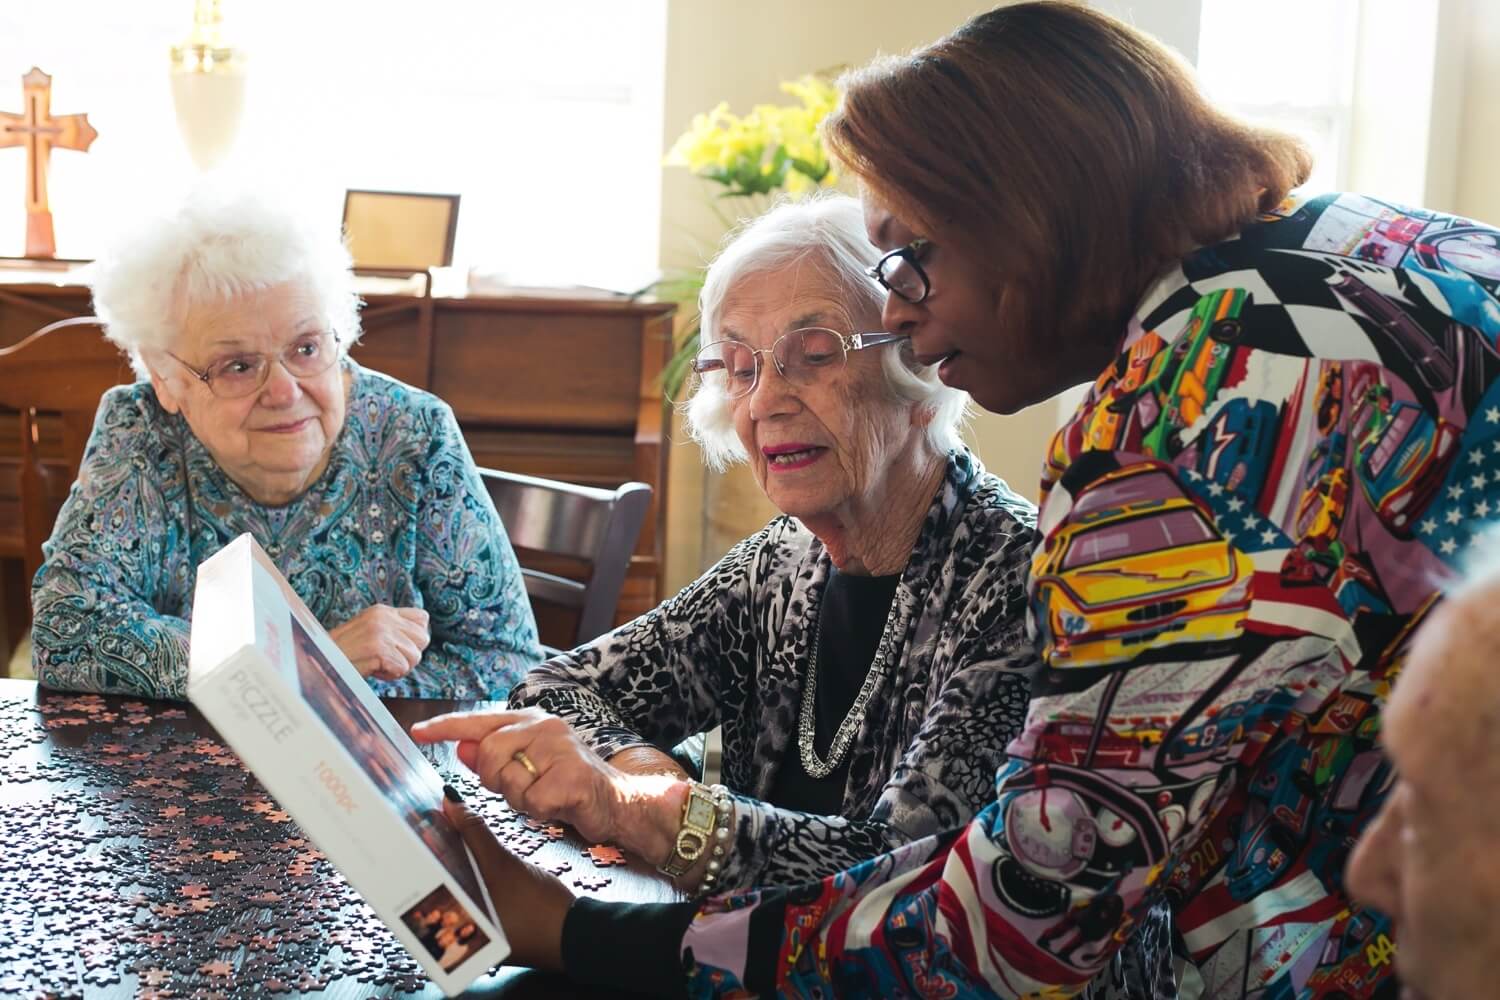 A team member helping two senior residents with a jigsaw puzzle